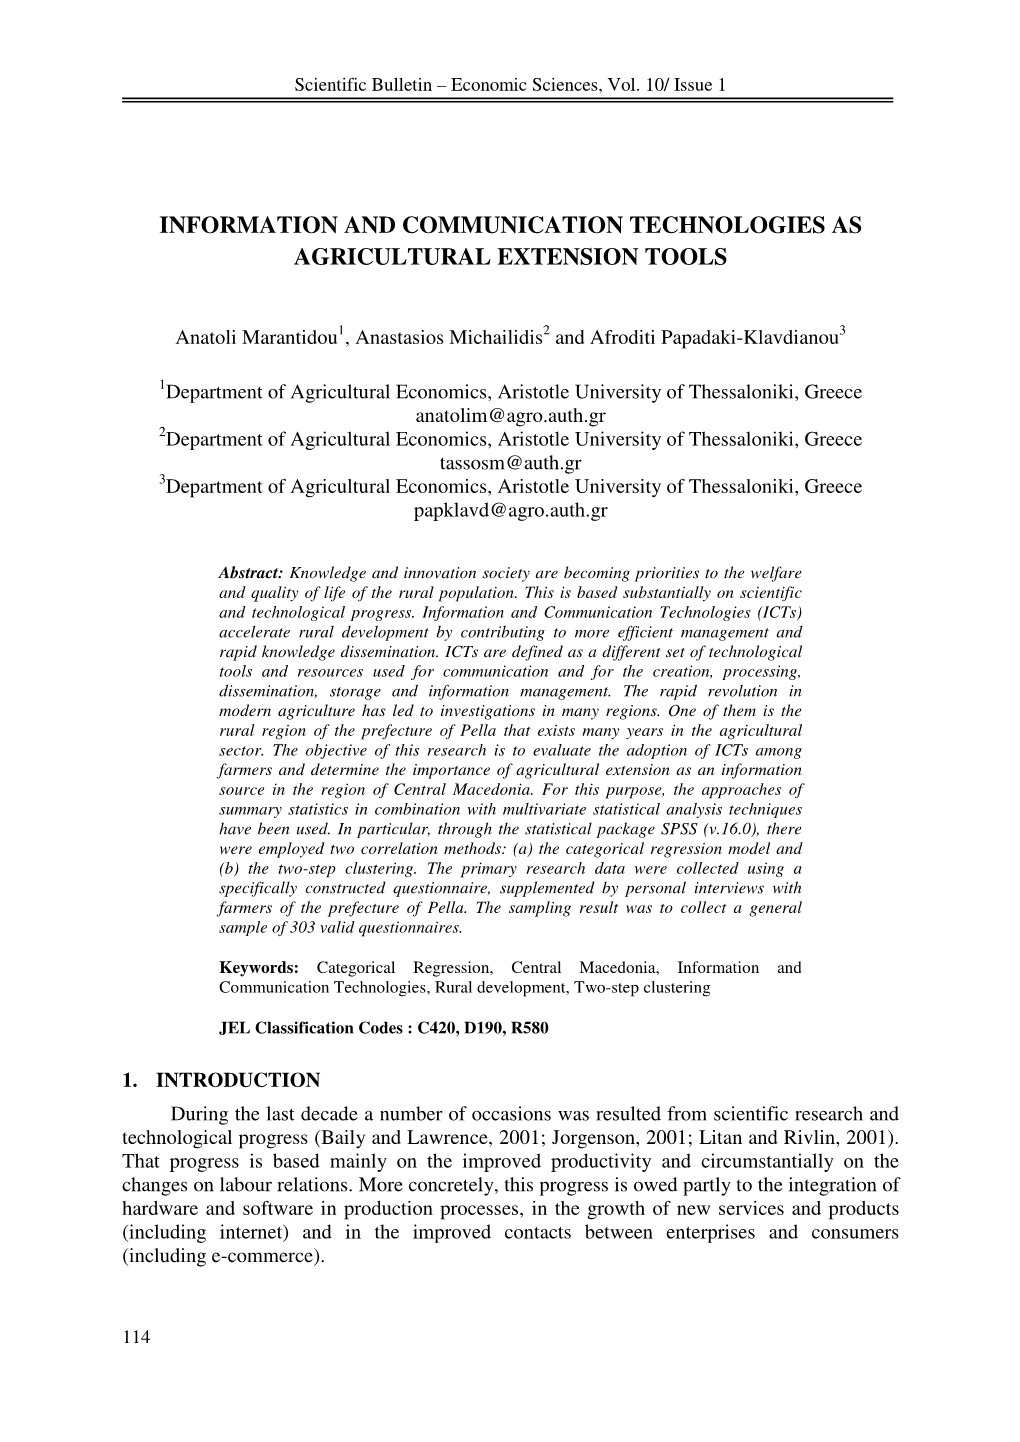 Information and Communication Technologies As Agricultural Extension Tools